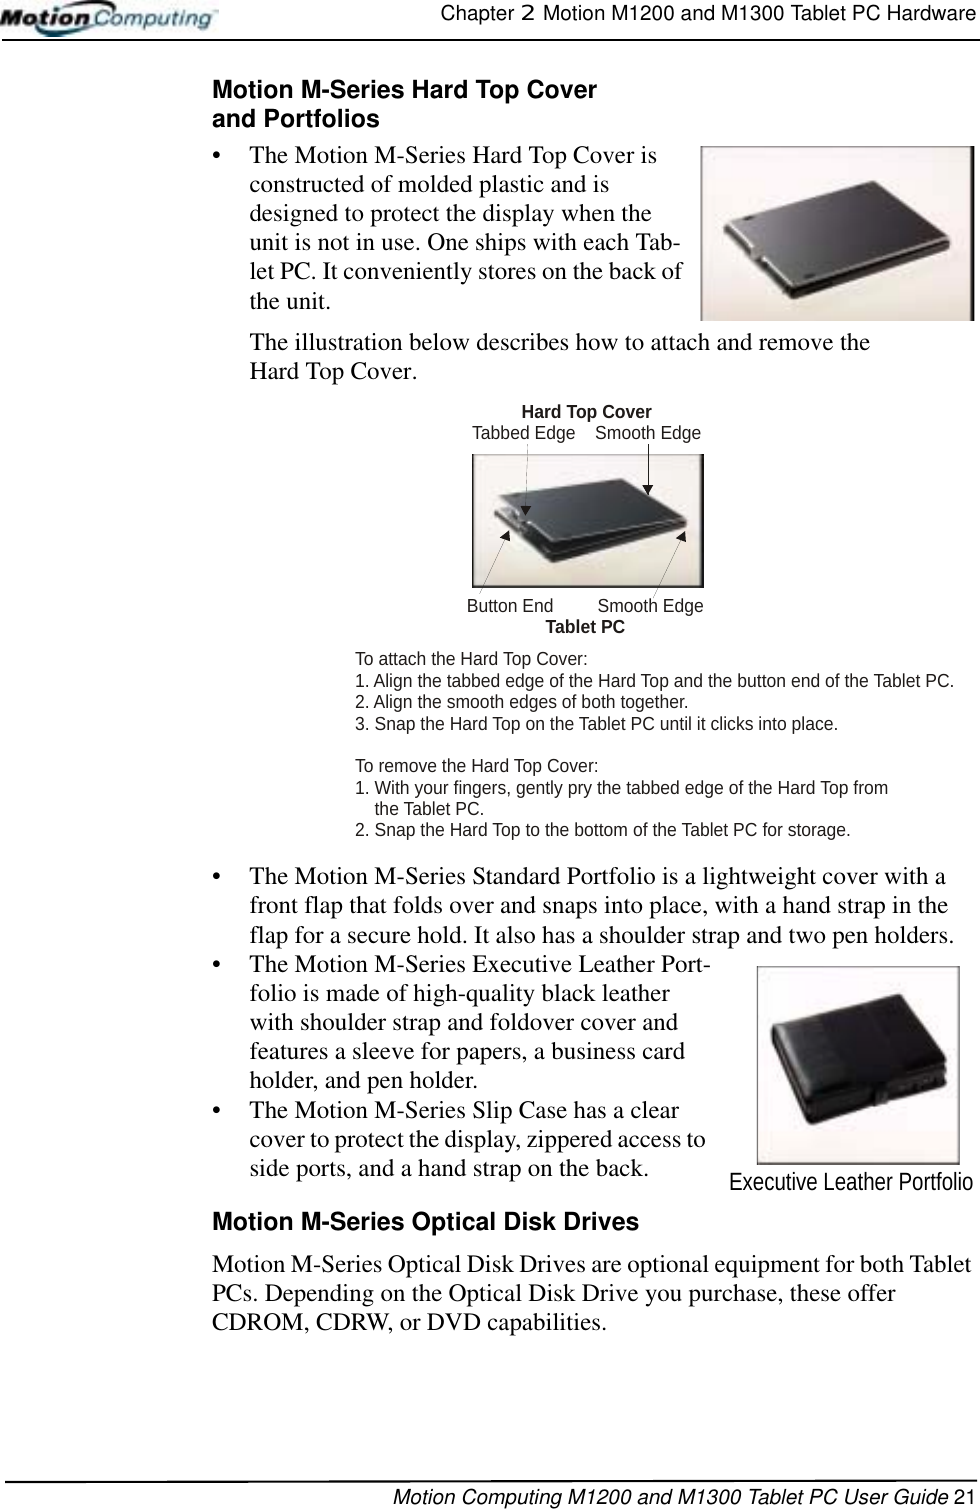 Chapter 2  Motion M1200 and M1300 Tablet PC HardwareMotion Computing M1200 and M1300 Tablet PC User Guide 21Motion M-Series Hard Top Coverand Portfolios• The Motion M-Series Hard Top Cover is constructed of molded plastic and is designed to protect the display when the unit is not in use. One ships with each Tab-let PC. It conveniently stores on the back of the unit. The illustration below describes how to attach and remove the Hard Top Cover.• The Motion M-Series Standard Portfolio is a lightweight cover with a front flap that folds over and snaps into place, with a hand strap in the flap for a secure hold. It also has a shoulder strap and two pen holders.• The Motion M-Series Executive Leather Port-folio is made of high-quality black leather with shoulder strap and foldover cover and features a sleeve for papers, a business card holder, and pen holder.• The Motion M-Series Slip Case has a clear cover to protect the display, zippered access to side ports, and a hand strap on the back.Motion M-Series Optical Disk DrivesMotion M-Series Optical Disk Drives are optional equipment for both Tablet PCs. Depending on the Optical Disk Drive you purchase, these offer CDROM, CDRW, or DVD capabilities. To attach the Hard Top Cover:1. Align the tabbed edge of the Hard Top and the button end of the Tablet PC.2. Align the smooth edges of both together.3. Snap the Hard Top on the Tablet PC until it clicks into place.To remove the Hard Top Cover:1. With your fingers, gently pry the tabbed edge of the Hard Top from    the Tablet PC.2. Snap the Hard Top to the bottom of the Tablet PC for storage.Hard Top CoverTabbed Edge    Smooth EdgeButton End         Smooth EdgeTablet PCExecutive Leather Portfolio